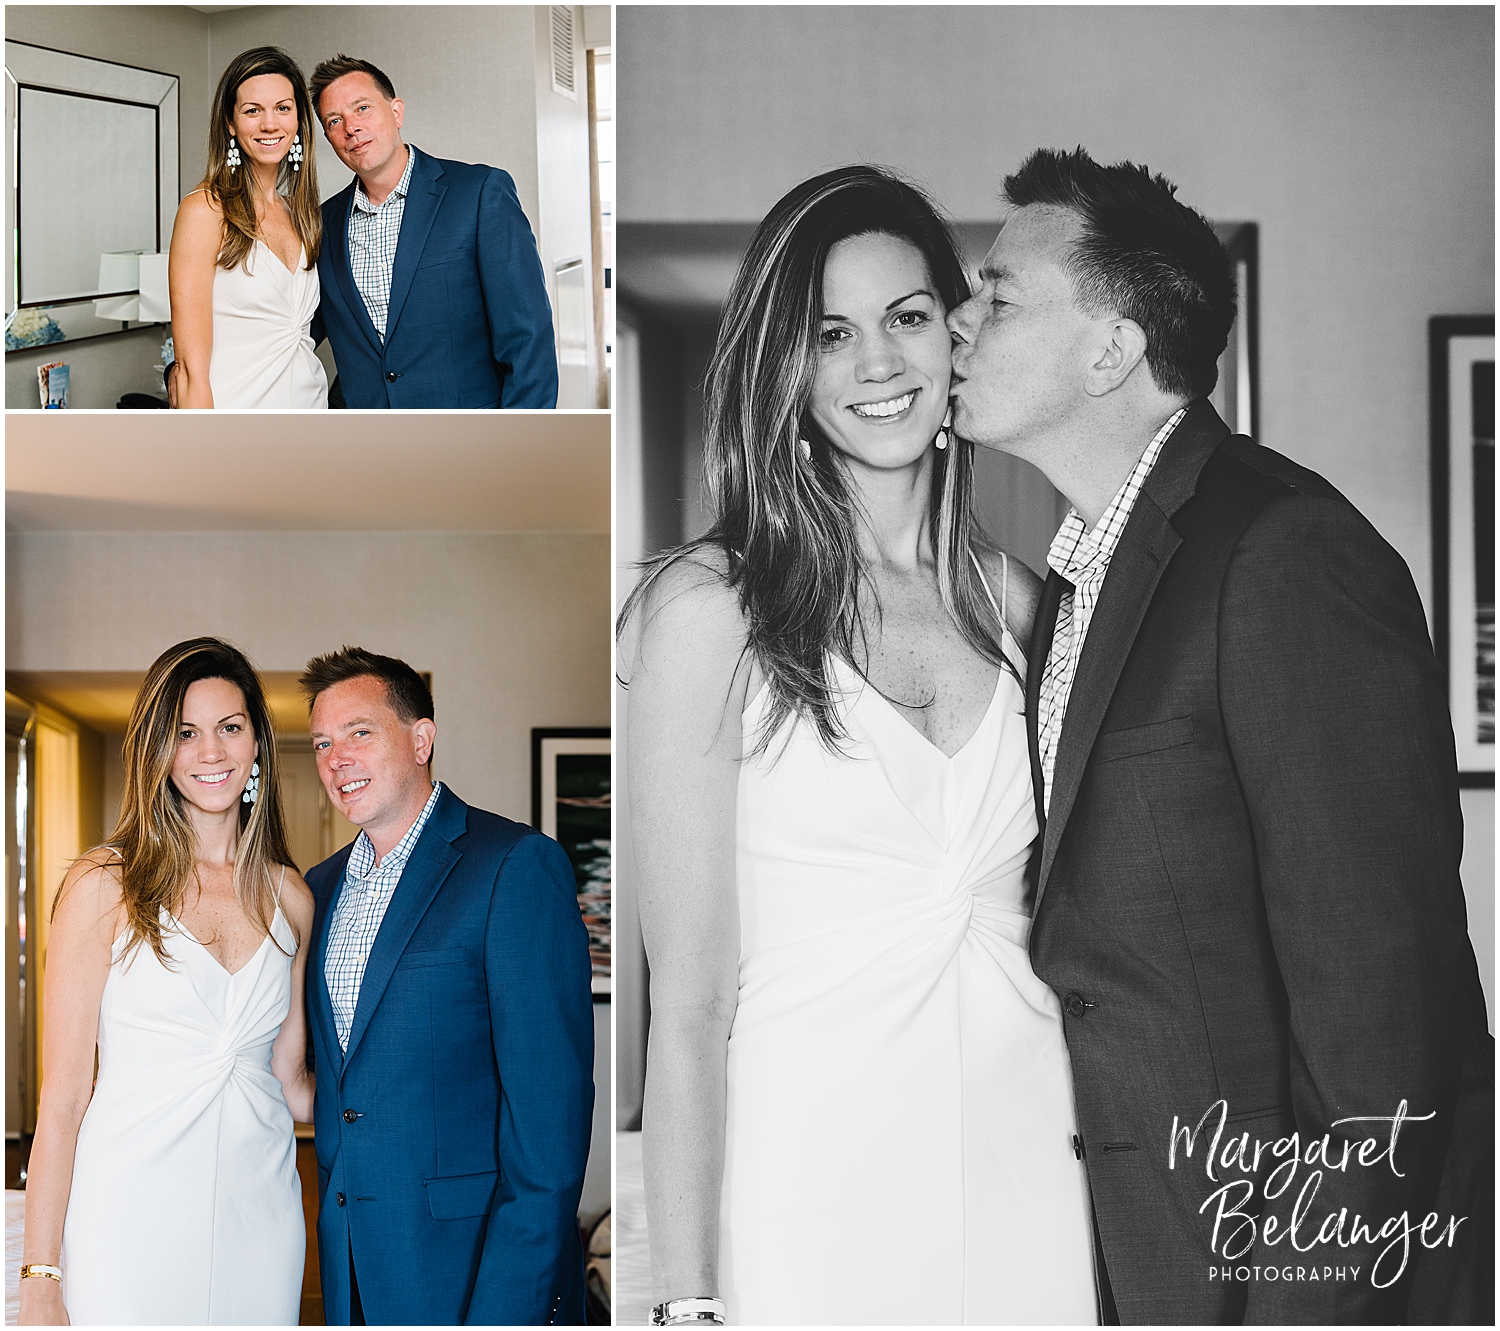 Images of a wedding couple dressed in formal attire, one posing with a smile and the other sharing a kiss.